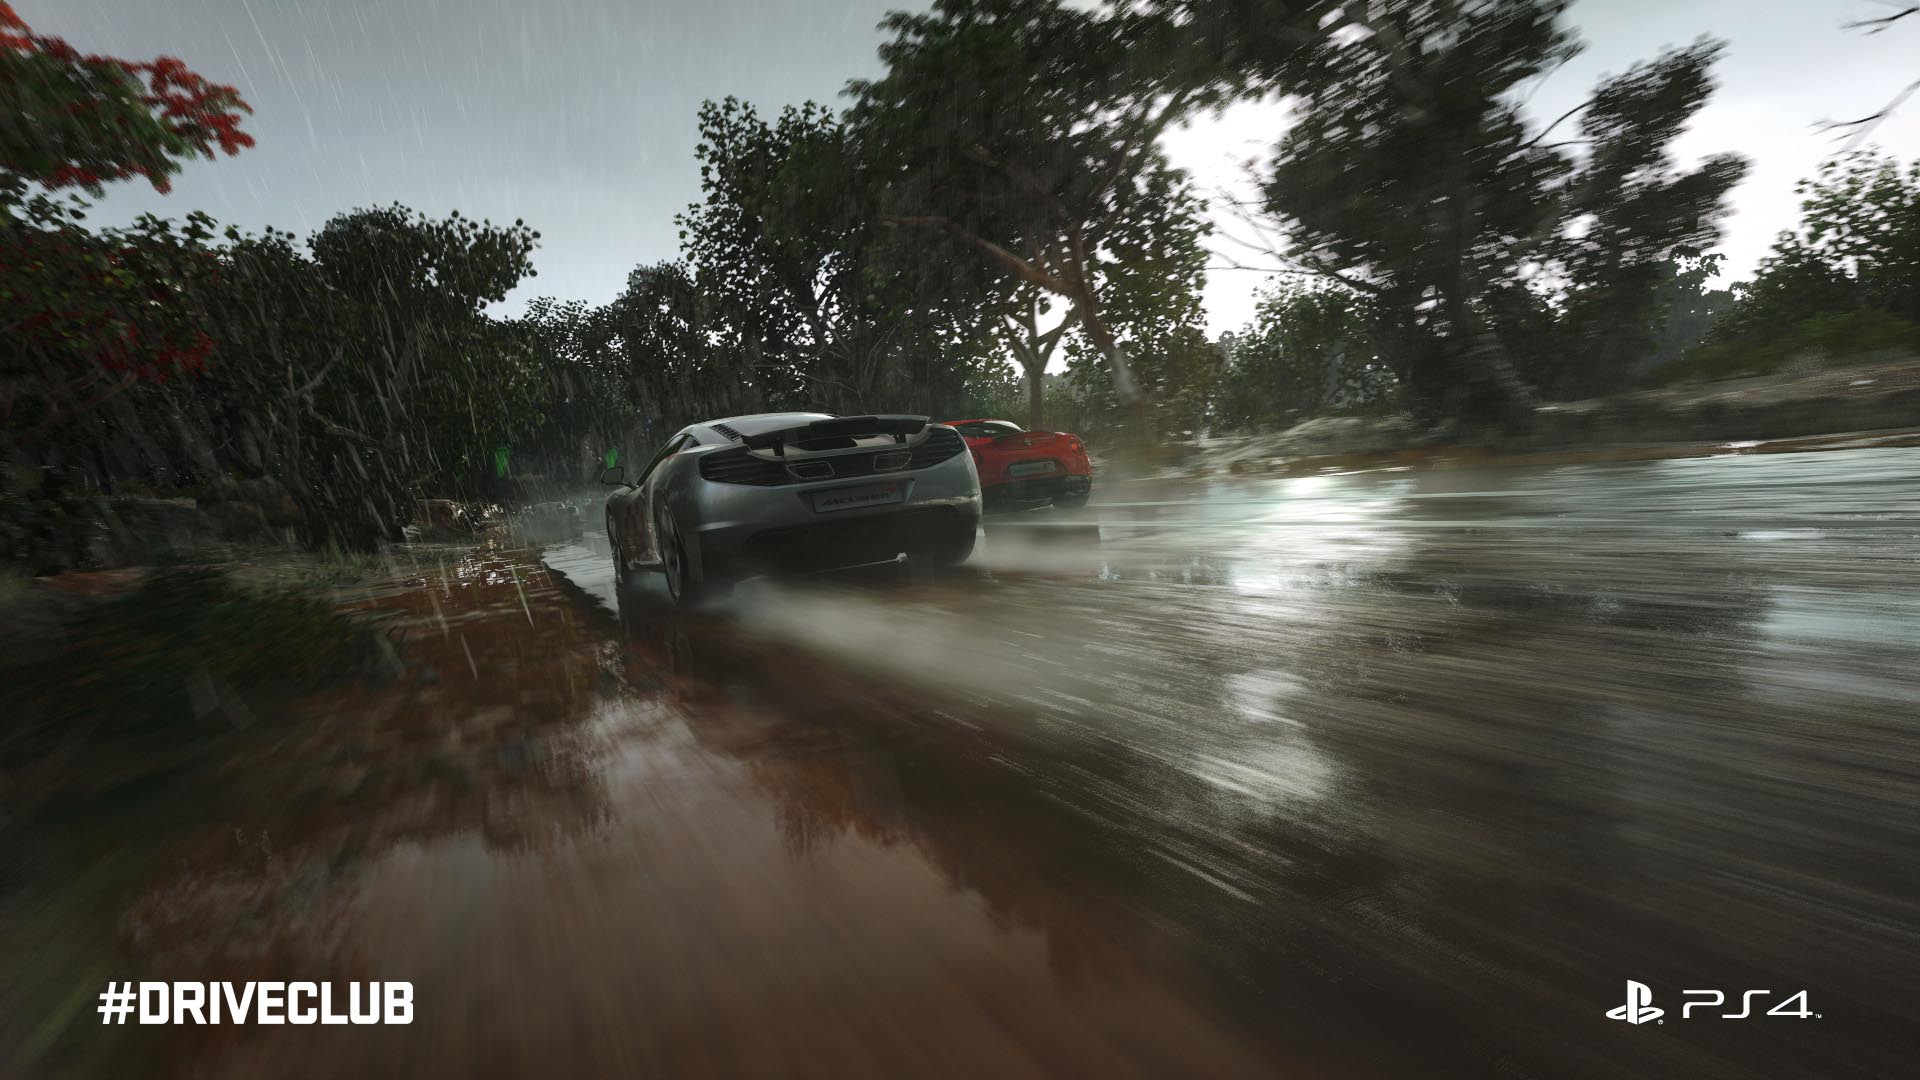 Since its rocky launch, Driveclub has shaped up to be an absolutely gorgeous showcase for the PS4, with dynamic weather and day/night cycles that dramatically alter the racetrack. Gameplay niggles have been diligently patched, and the promised free version for Playstation Plus subscribers has recently launched, which is sure to bring an influx of new players. | <b>For:</b> PS4